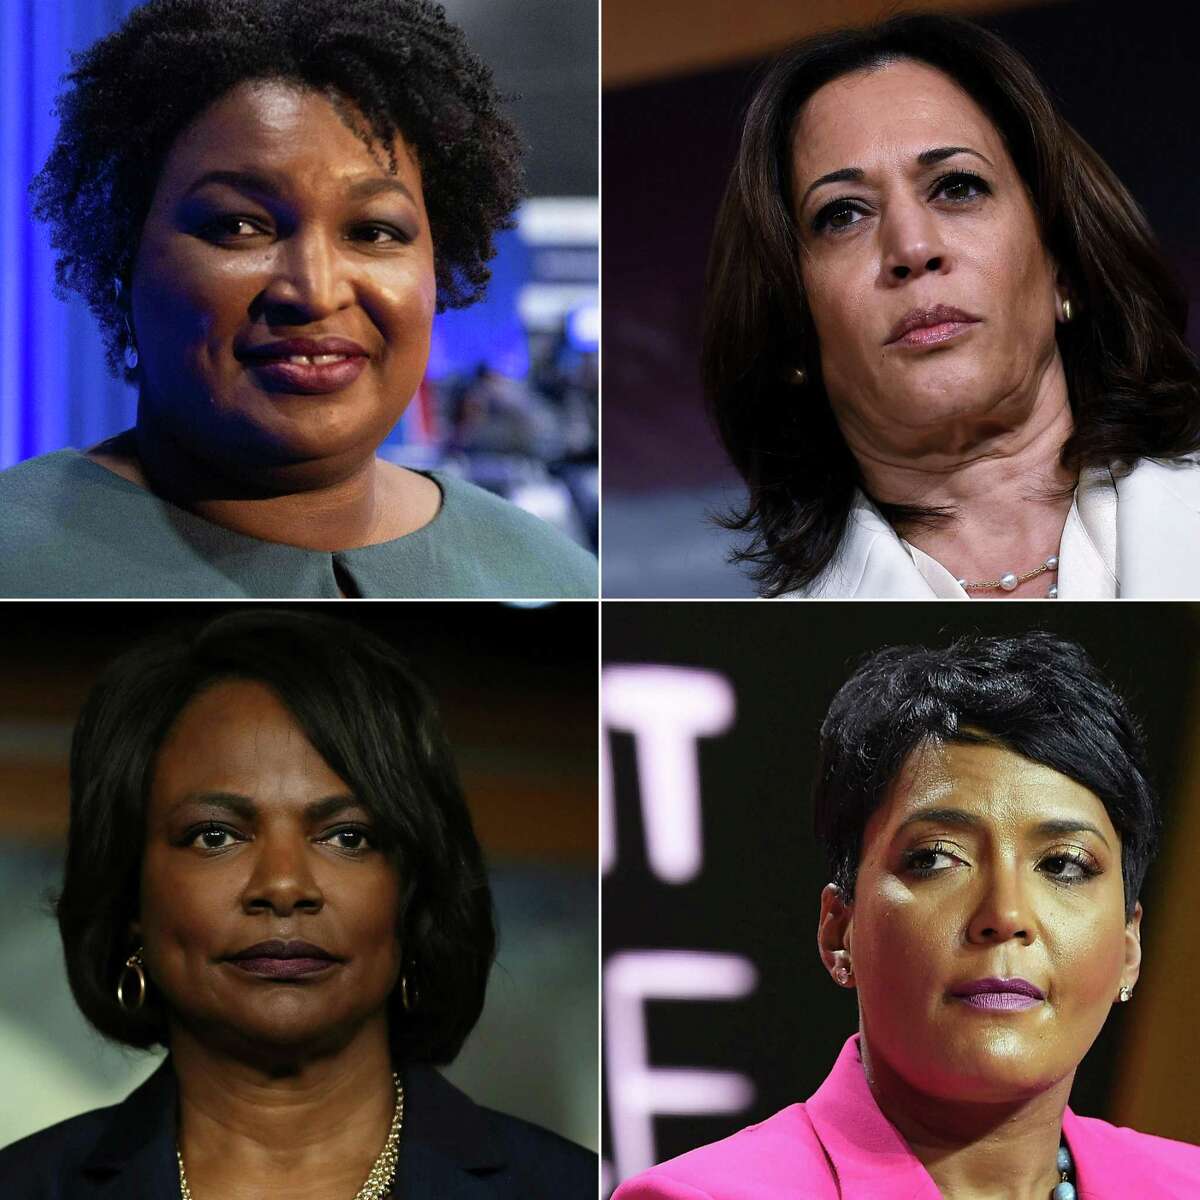 (COMBO) This combination of file photos created on June 09, 2020 shows (L to R, top to bottom) former Georgia Democratic gubernatorial candidate Stacey Abrams, US Senator Kamala Harris, US Representative.Val Demings, and Atlanta Mayor Keisha Lance. - With the White House campaign heading into its coronavirus-hobbled home stretch, Democratic nominee Joe Biden is preparing to announce his vice presidential running mate, a woman likely to play an outsize role in a new administration. (Photos by AFP) (Photo by NICHOLAS KAMM,OLIVIER DOULIERY,CHIP SOMODEVILLA,PARAS GRIFFIN/AFP via Getty Images)